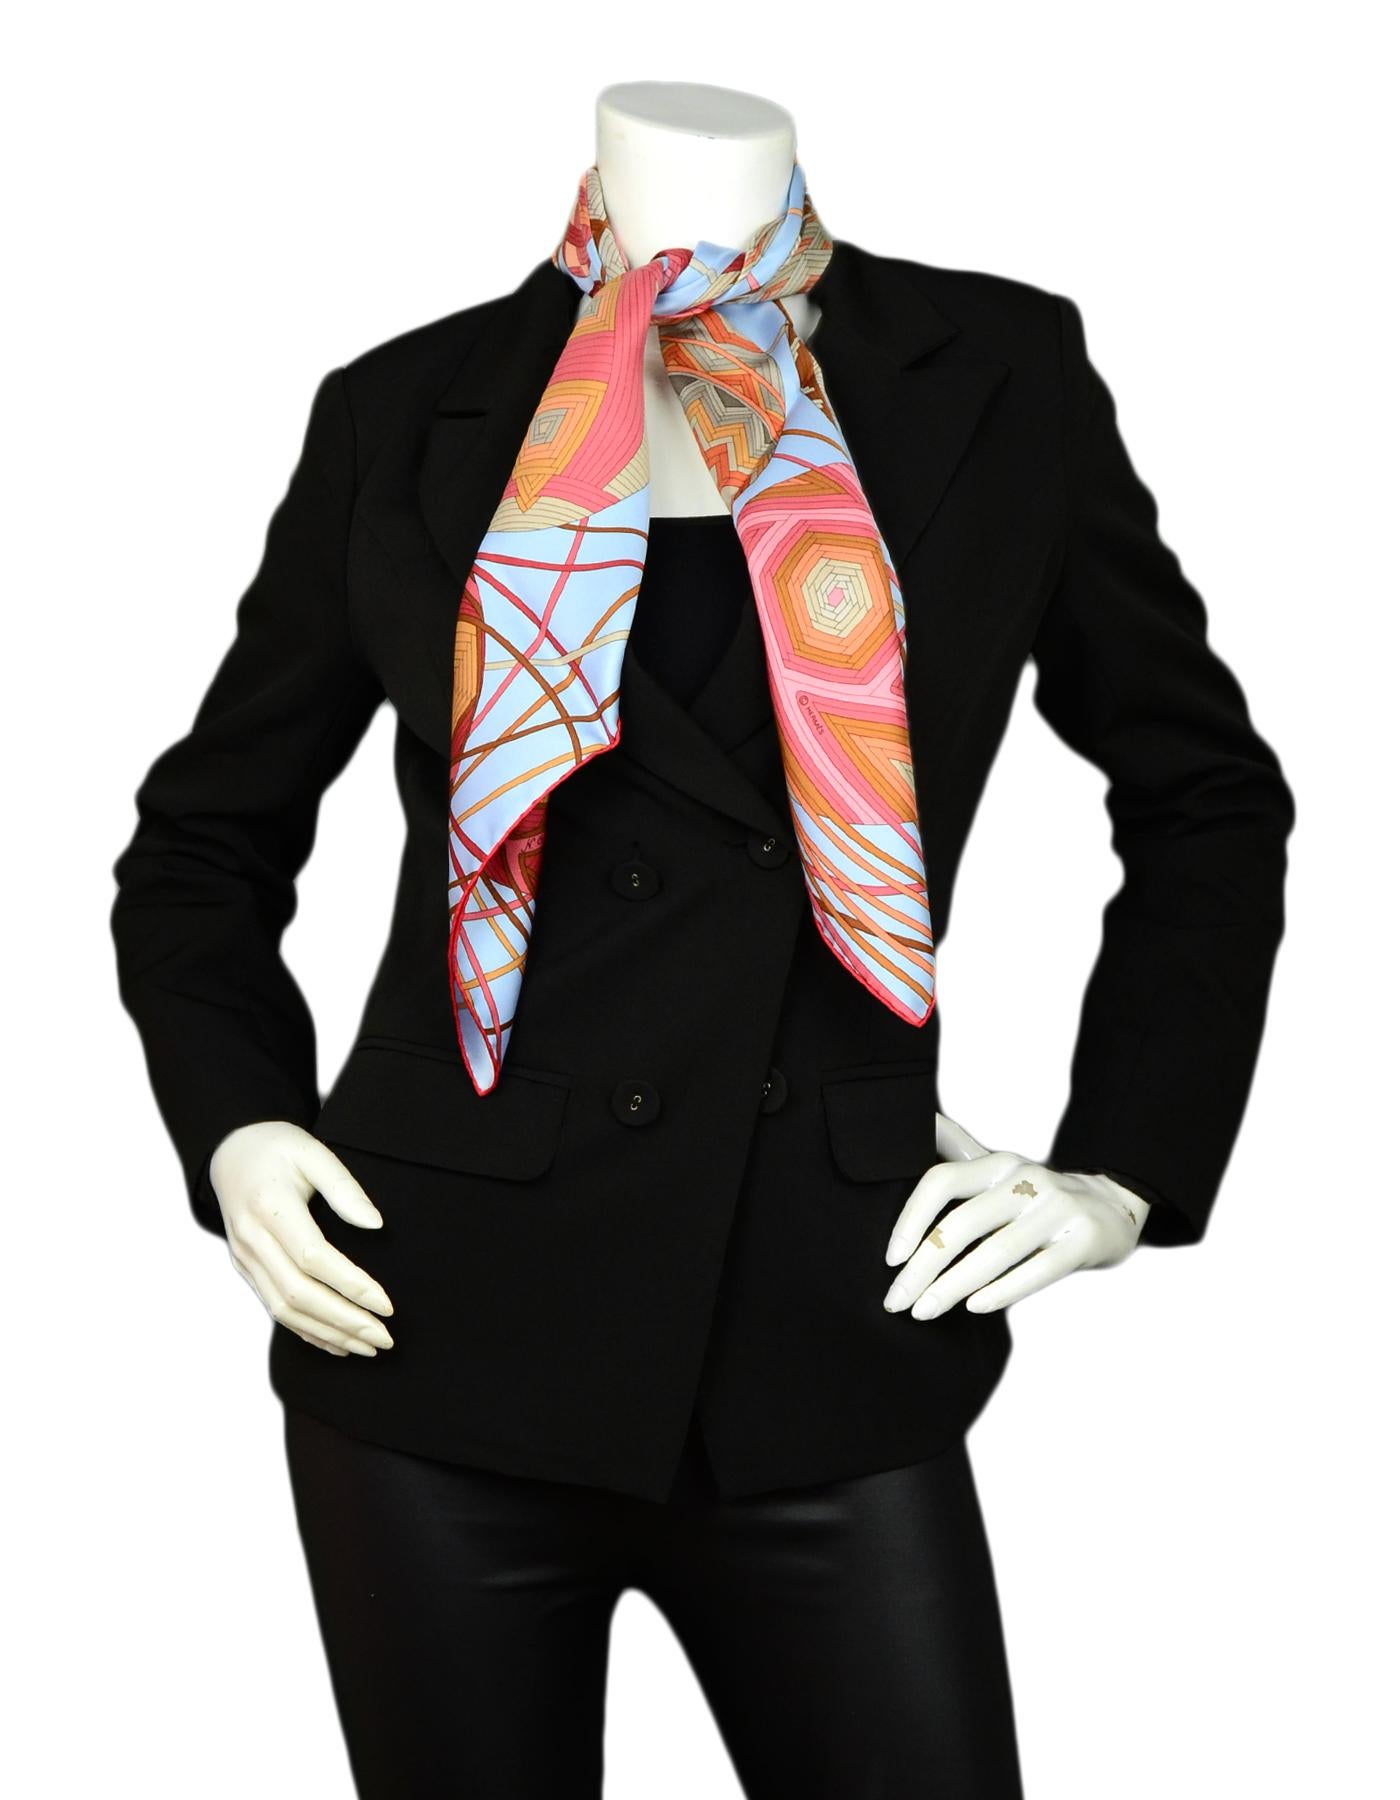 Hermes Blue Marron L'Art du Temari 90cm Silk Scarf designed by Nathalie Vialars 

Made In: France
Color: Light Blue, Pink, Red
Materials: 100% Silk 
Overall Condition: Excellent pre-owned condition
Estimated Retail: $415 + tax
Includes: